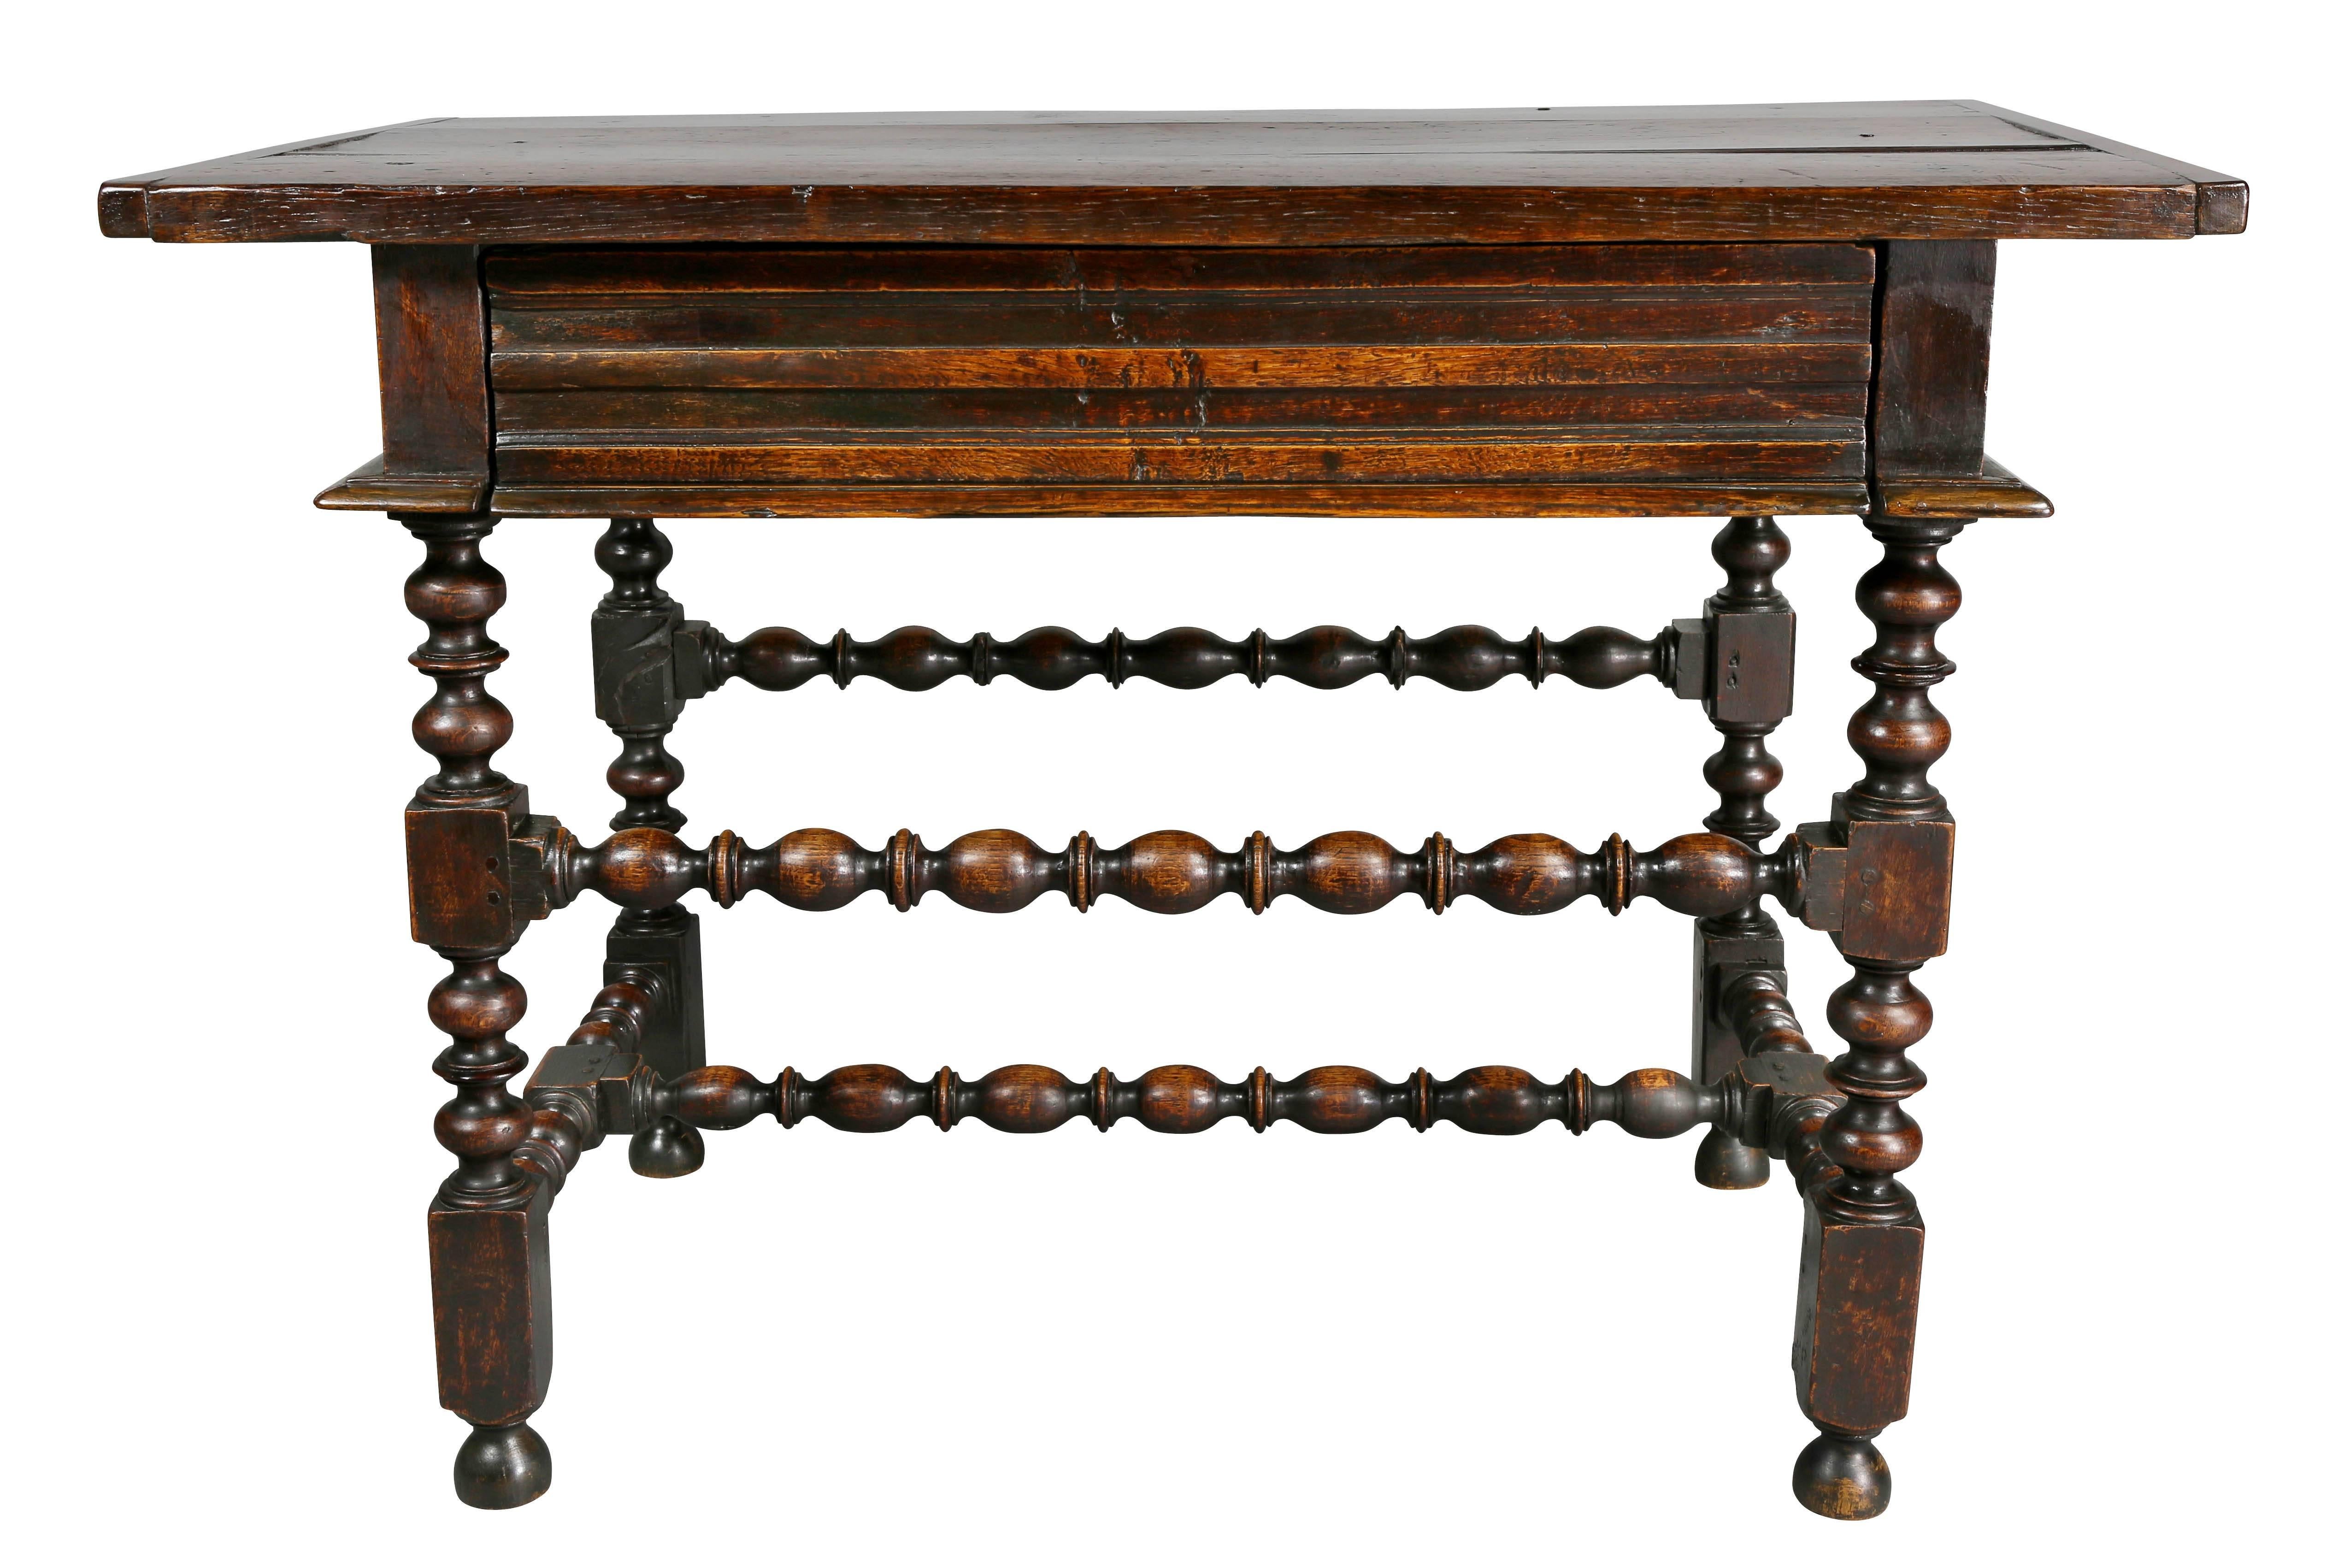 Rectangular top over a long drawer and raised on turned legs and stretchers.